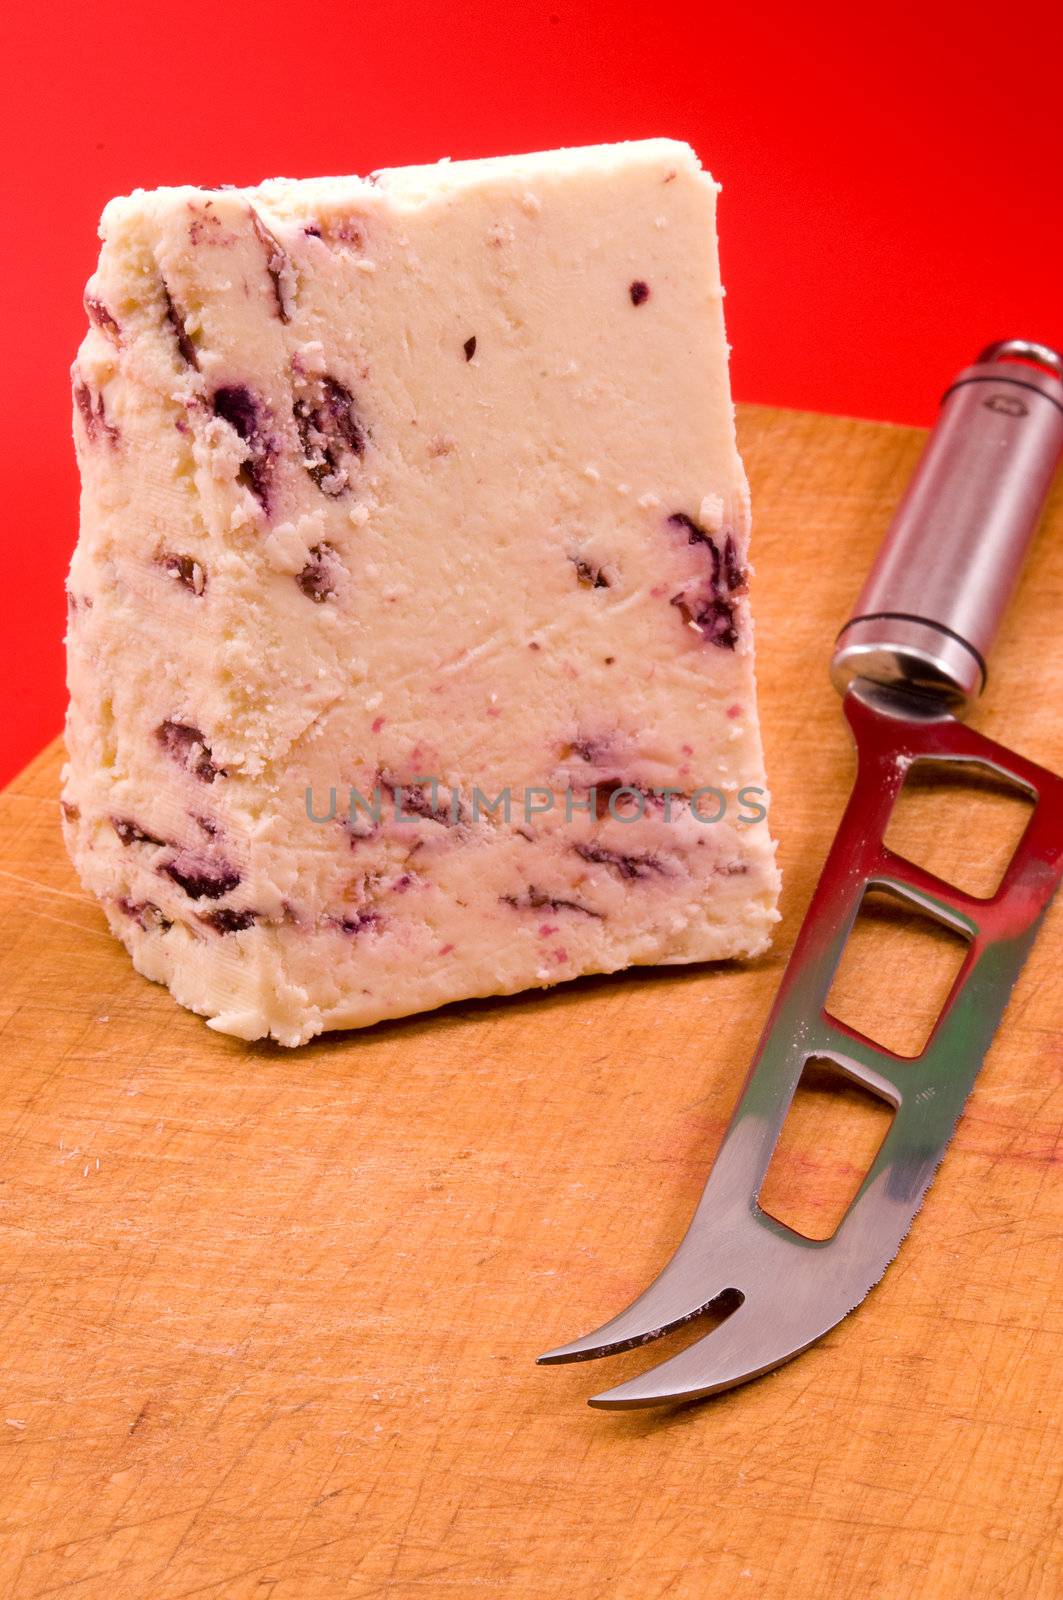 
	
Chader cheese with cranberries and a knife lying on a wooden board